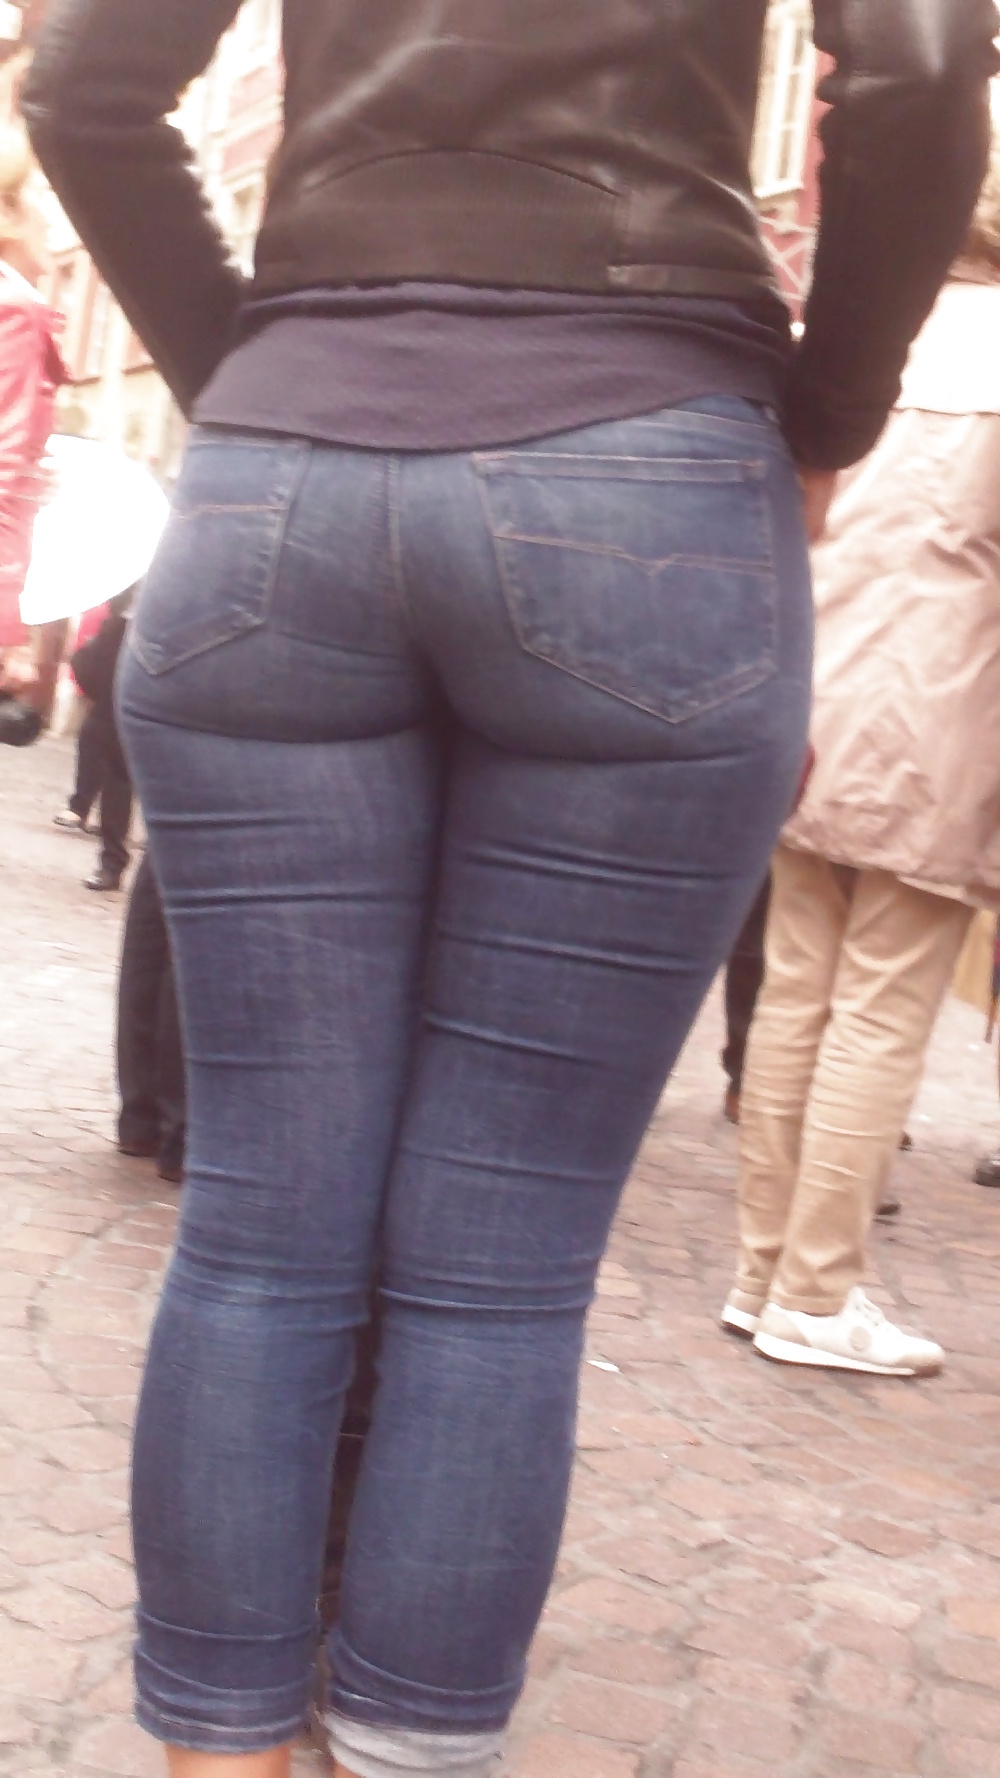 Nice big juicy teen ass & butt in very tight blue jeans  #31832242